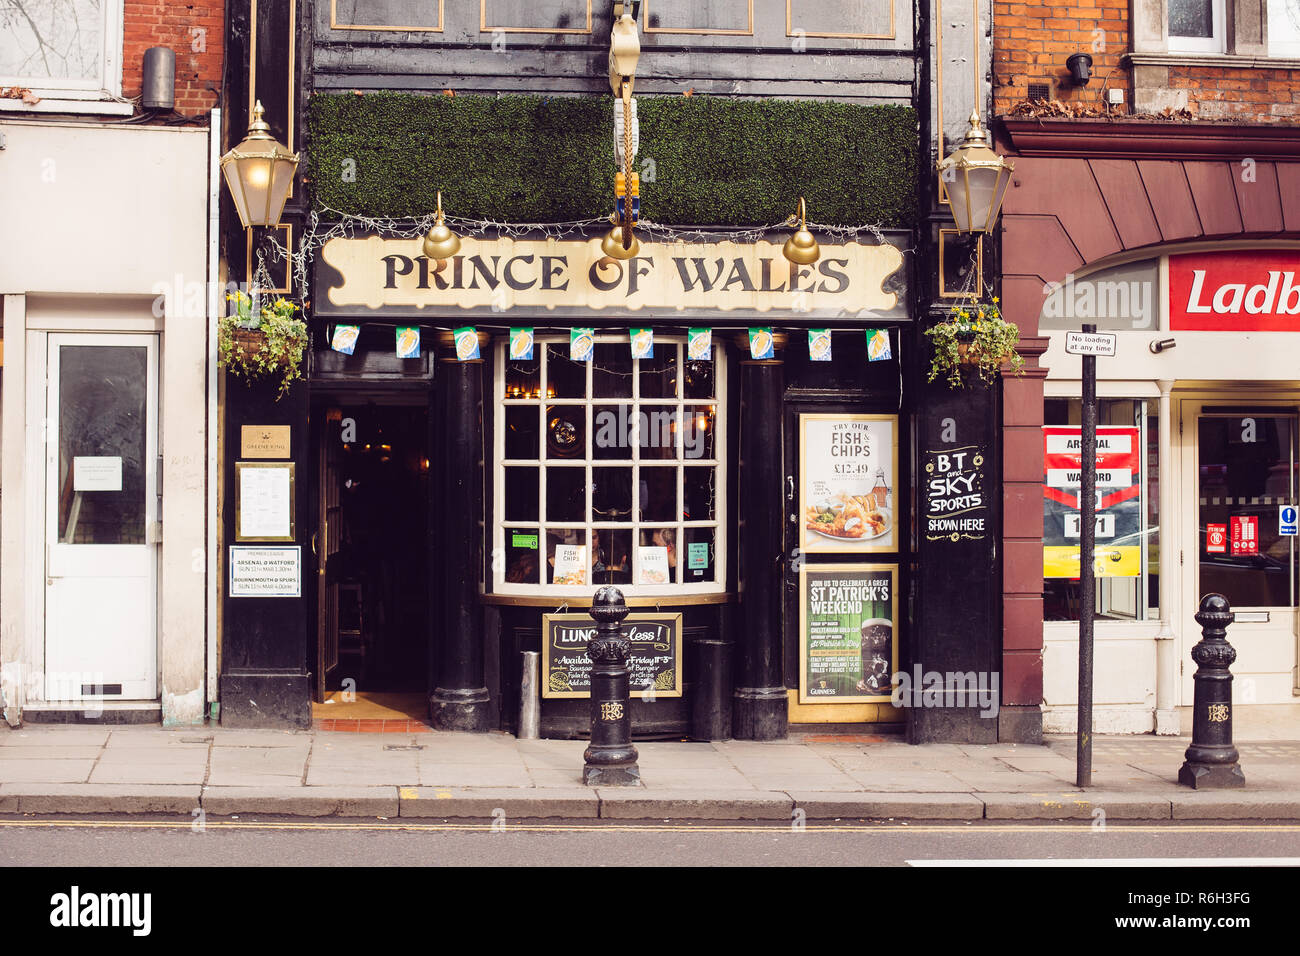 London, UK / March 11 2018: The Prince of Wales Pub on Kensington Church Street in Kensington, London, England, designated the A4204, and traditionall Stock Photo